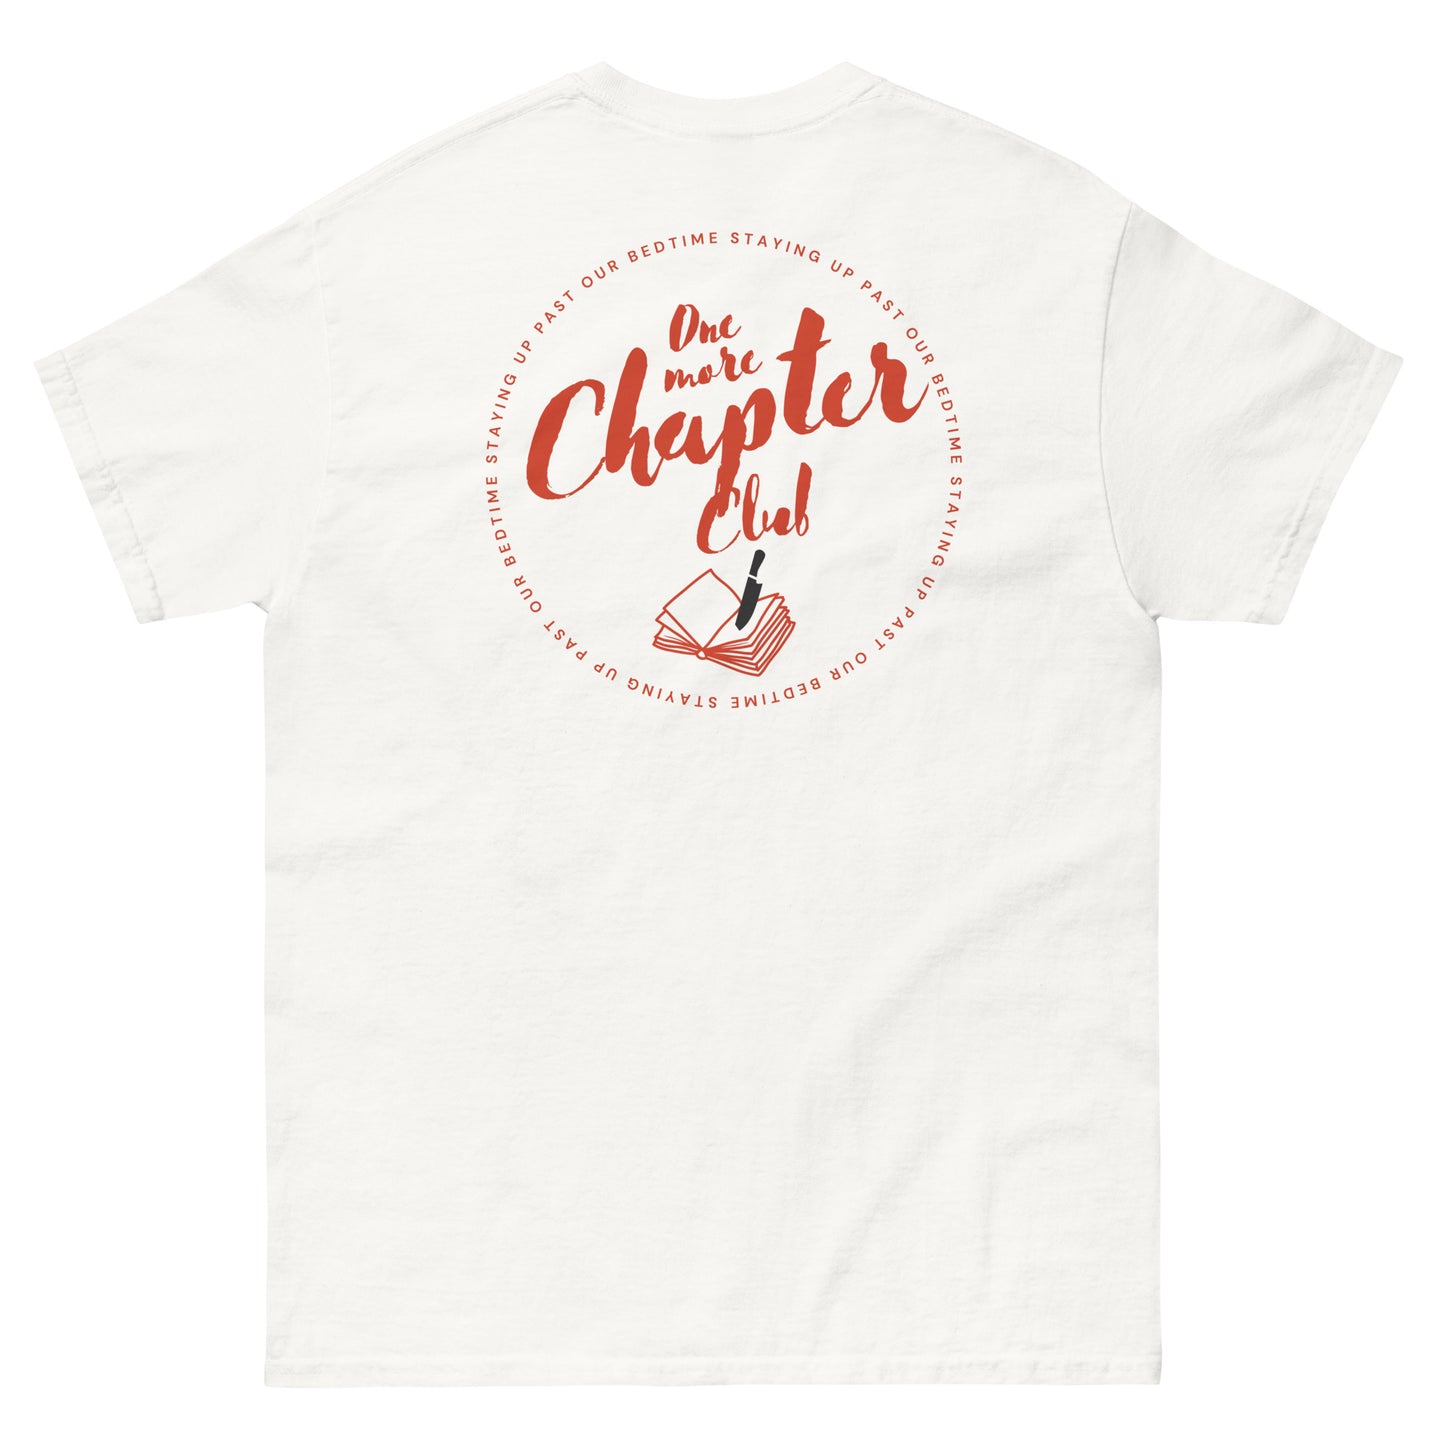 One More Chapter Club | Men's classic tee